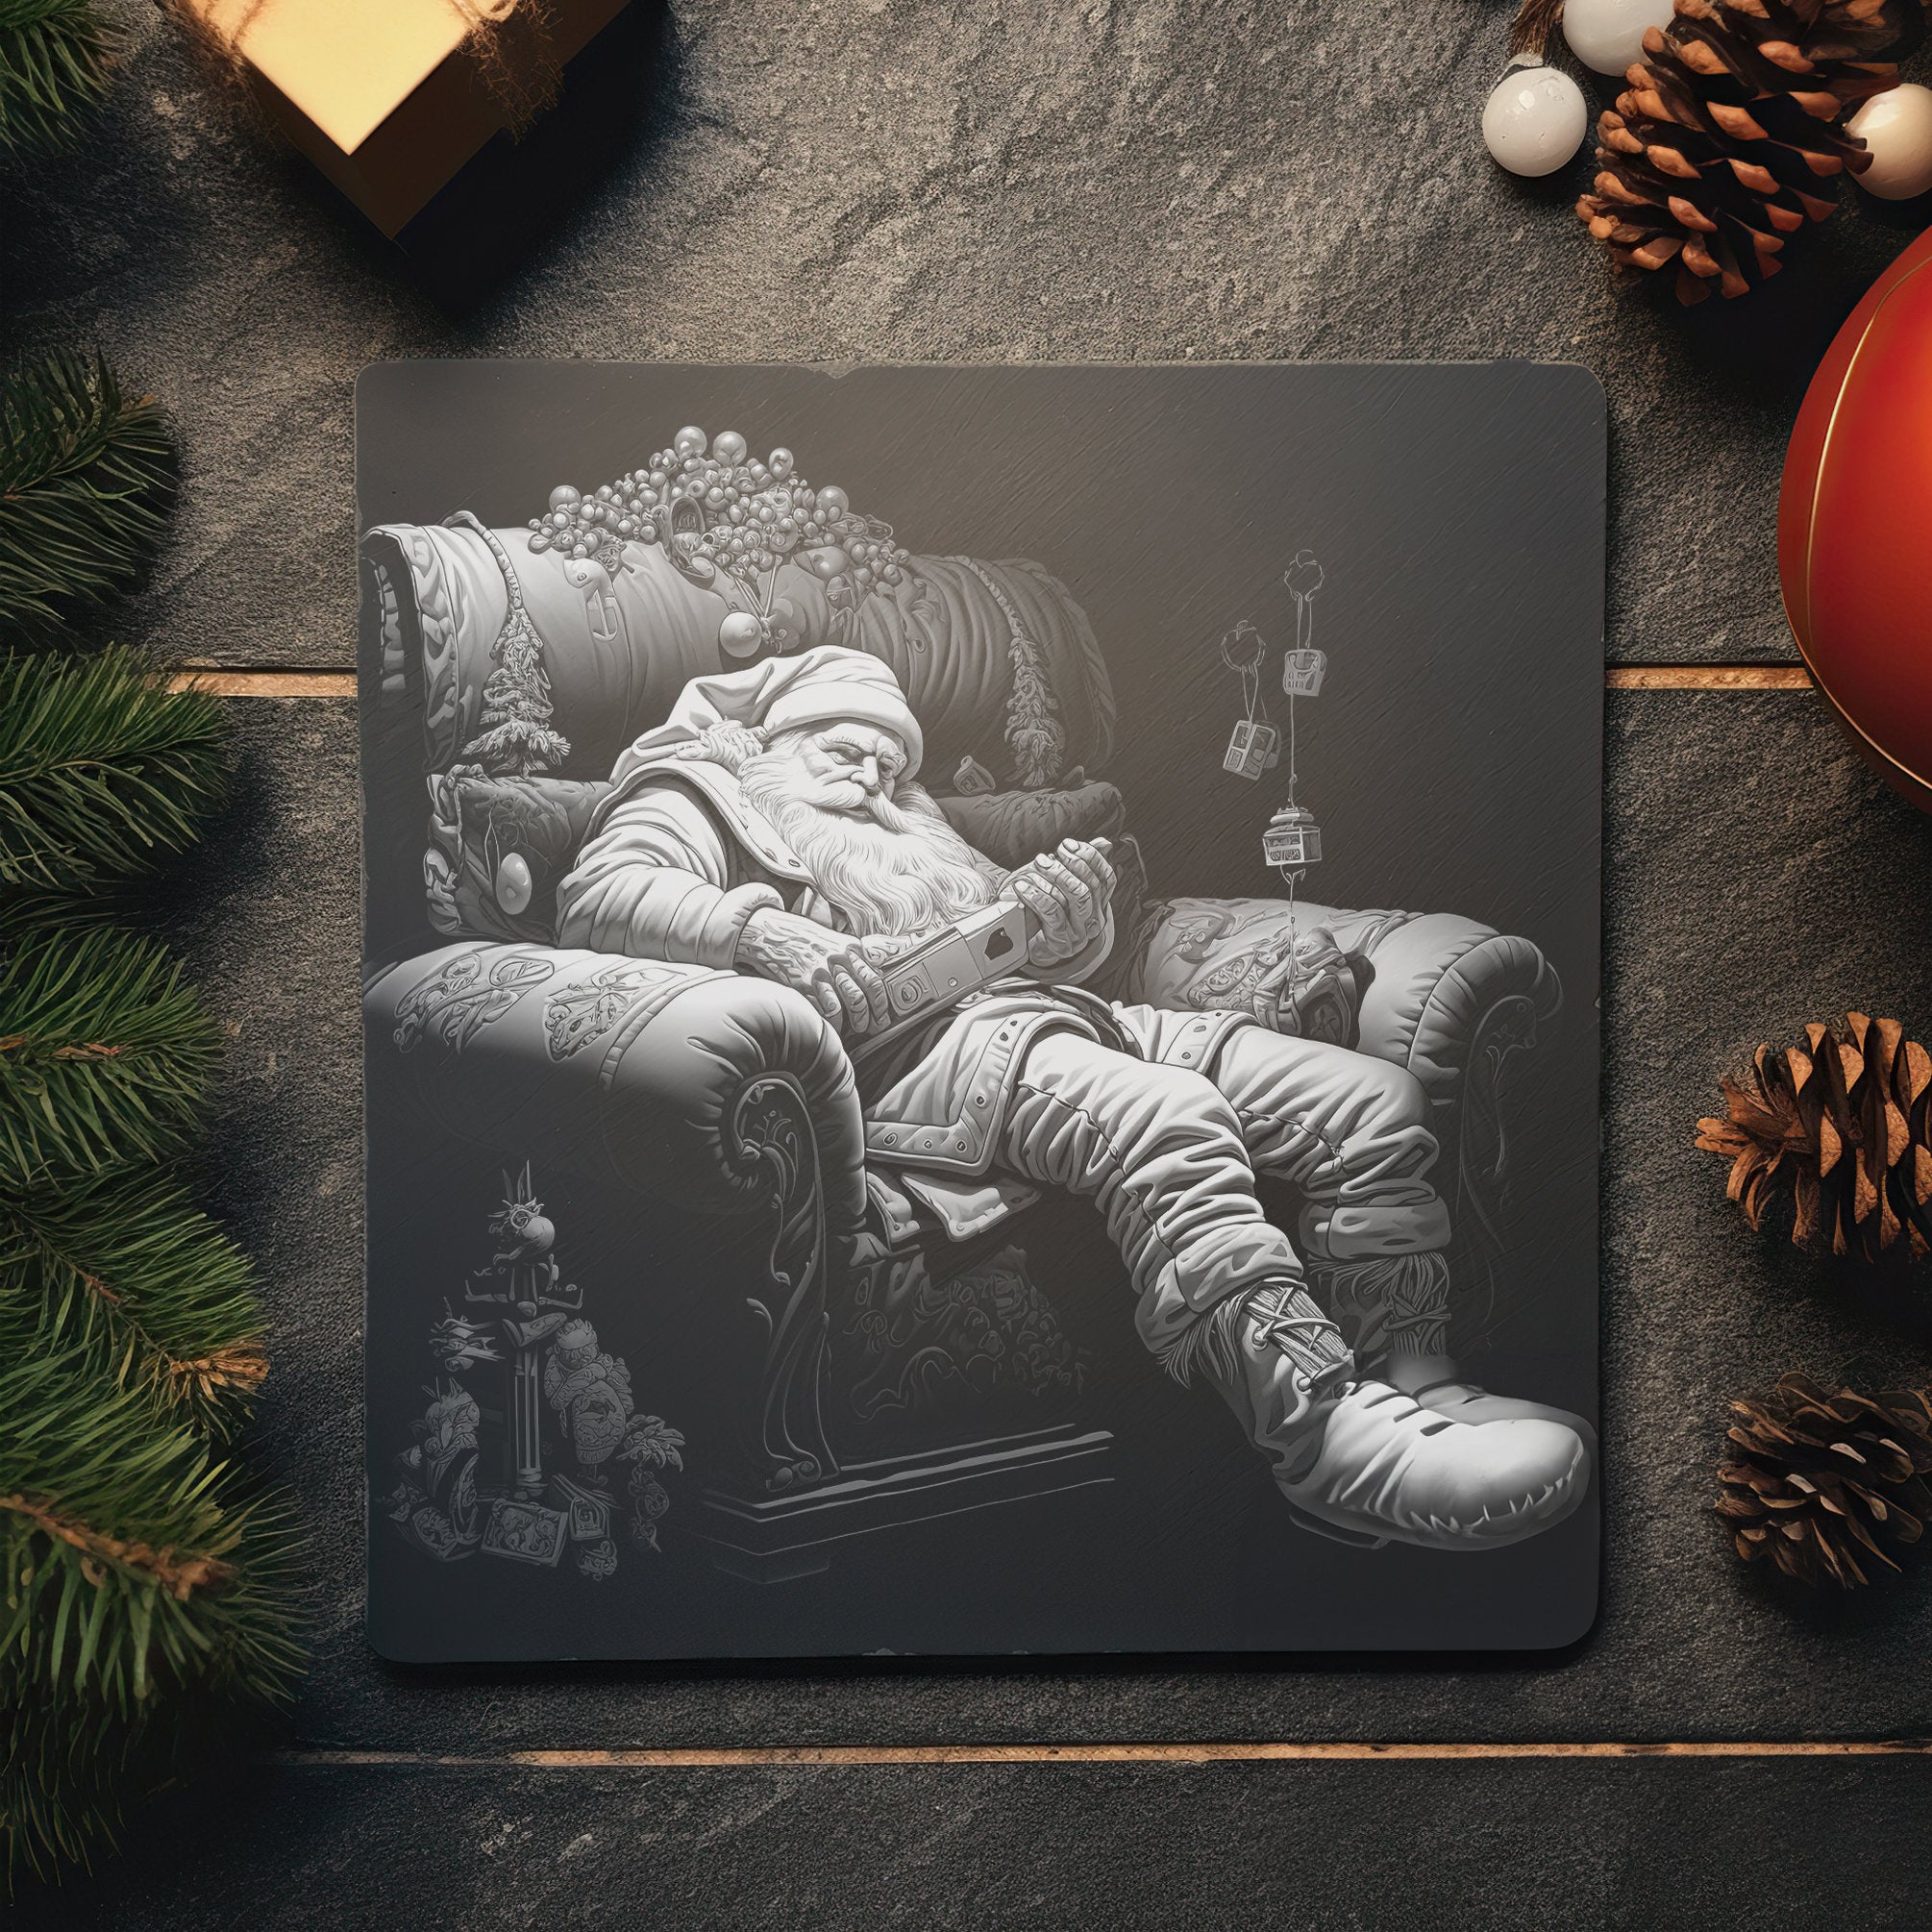 Slate - Santa Comfy on the Couch